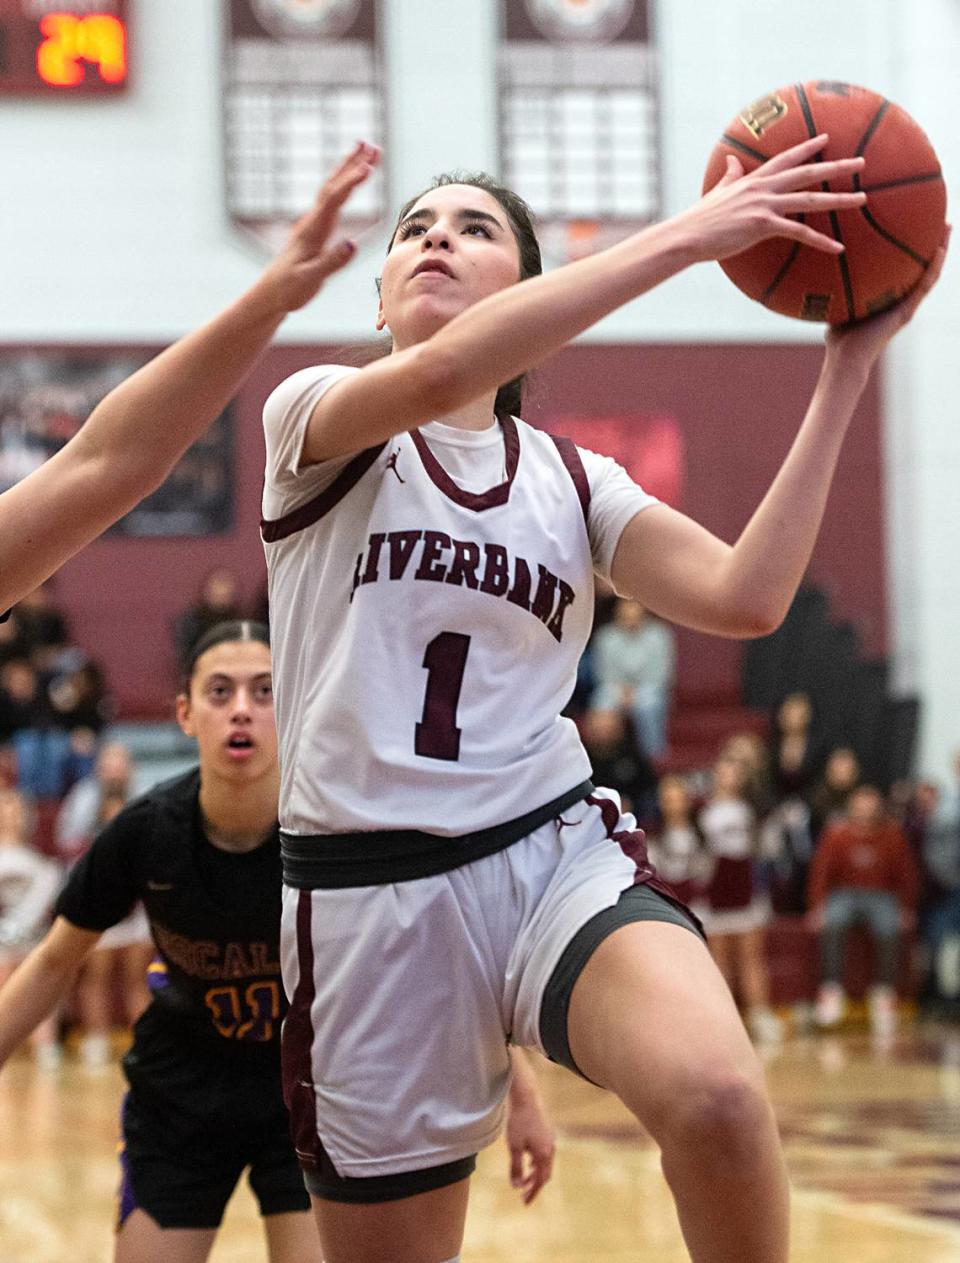 Riverbank’s Livi Fernandez drives to the hoop during the Sac-Joaquin section semifinal playoff game with Escalon in Riverbank, Calif., Tuesday, Feb. 21, 2023.